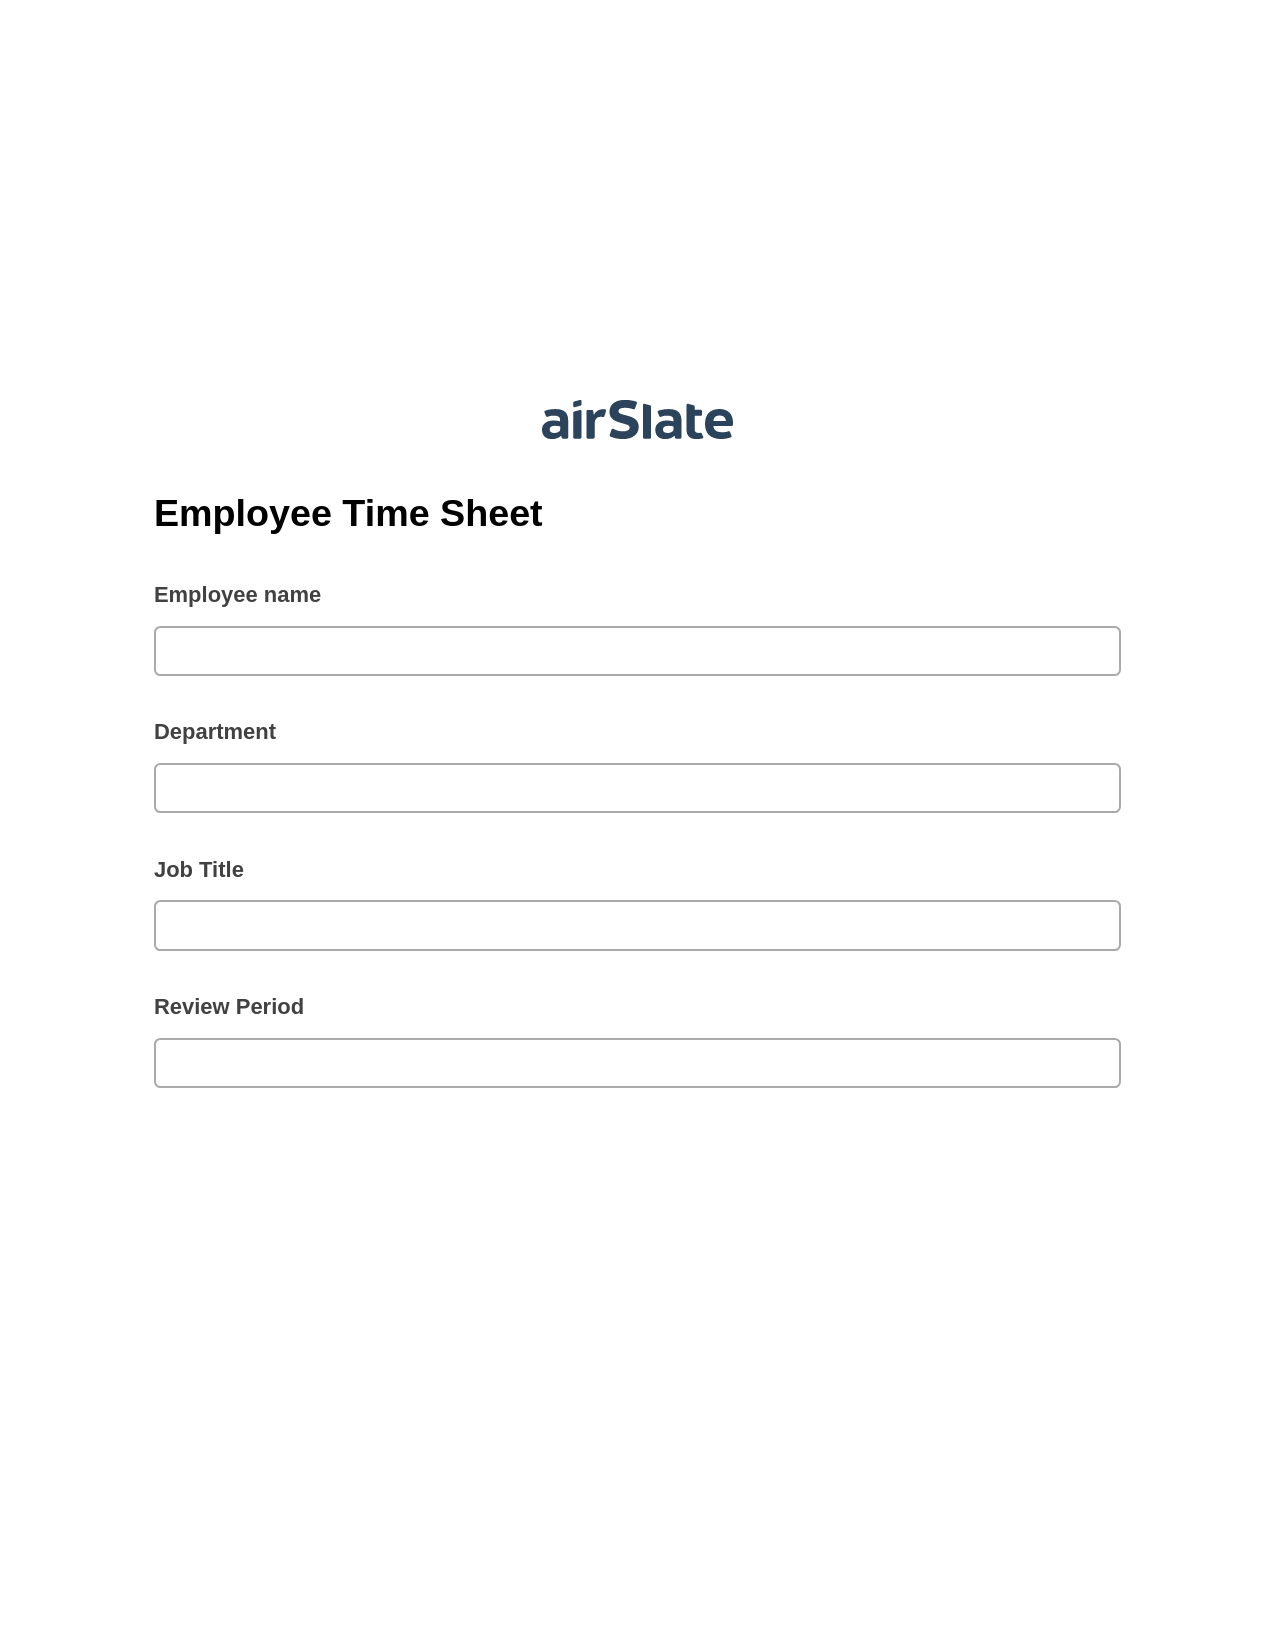 Employee Time Sheet Pre-fill Dropdowns from Excel Bot, Create Salesforce Records Bot, Export to Salesforce Record Bot